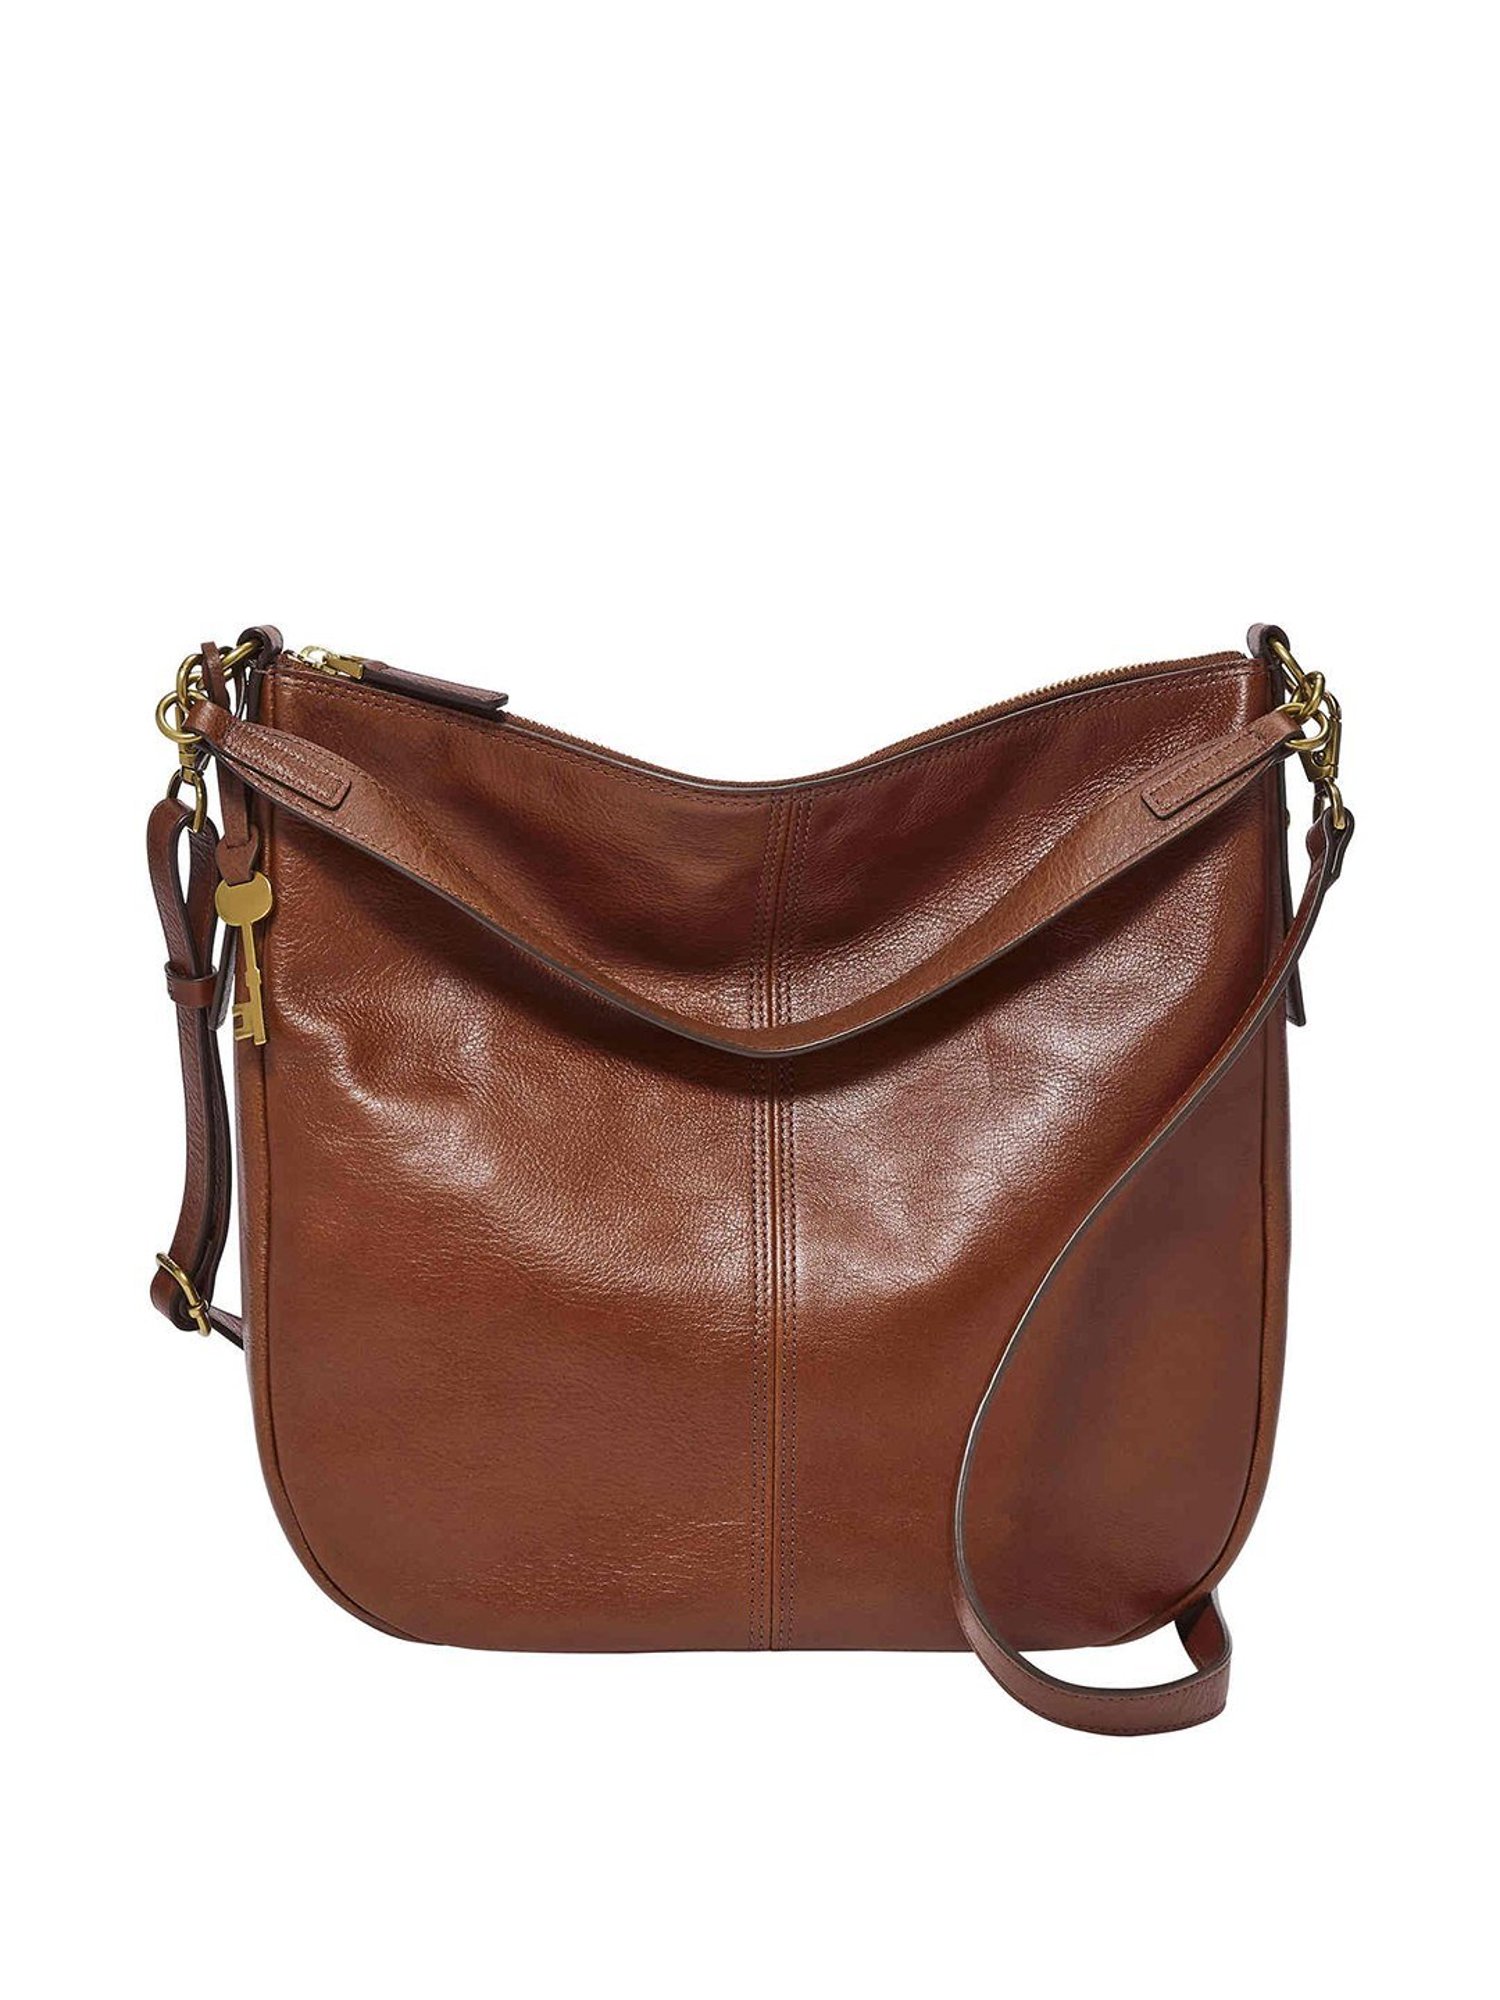 Fossil - Meet Jolie, the bag you need this Spring! https://bddy.me/2MleJrb  | Facebook